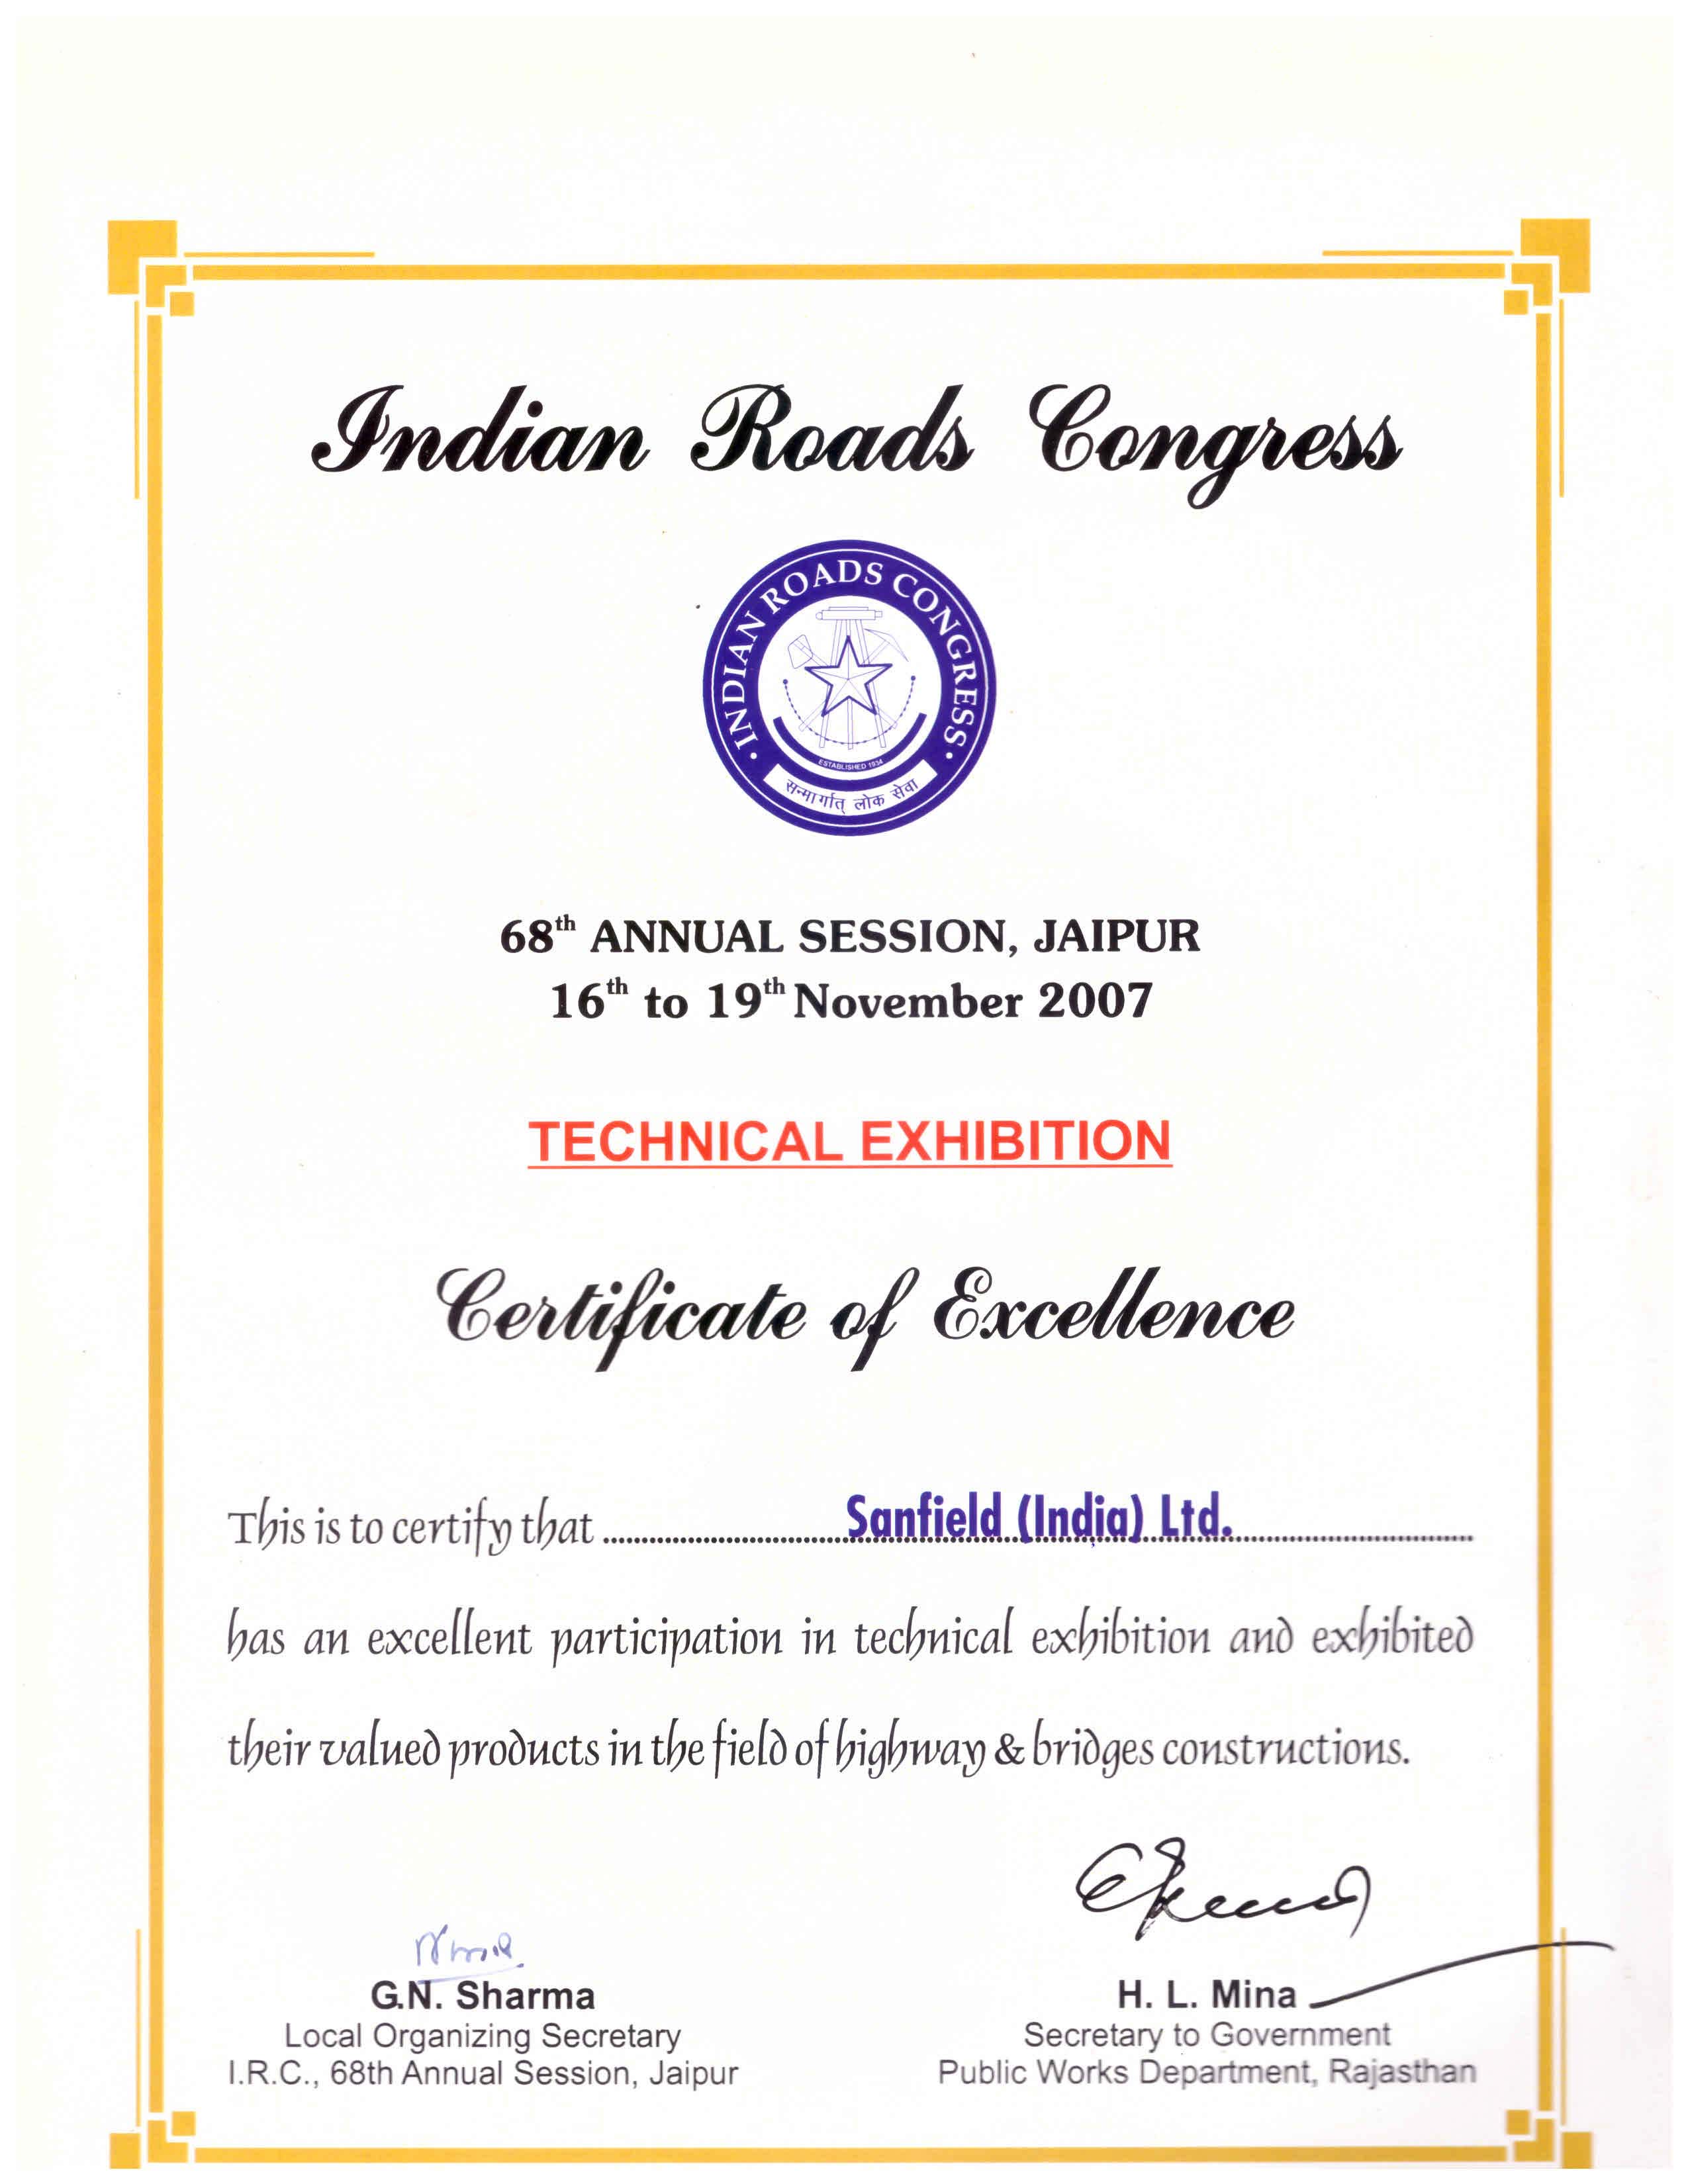 Indian Road congress,Jaipur - Certificate of excellence